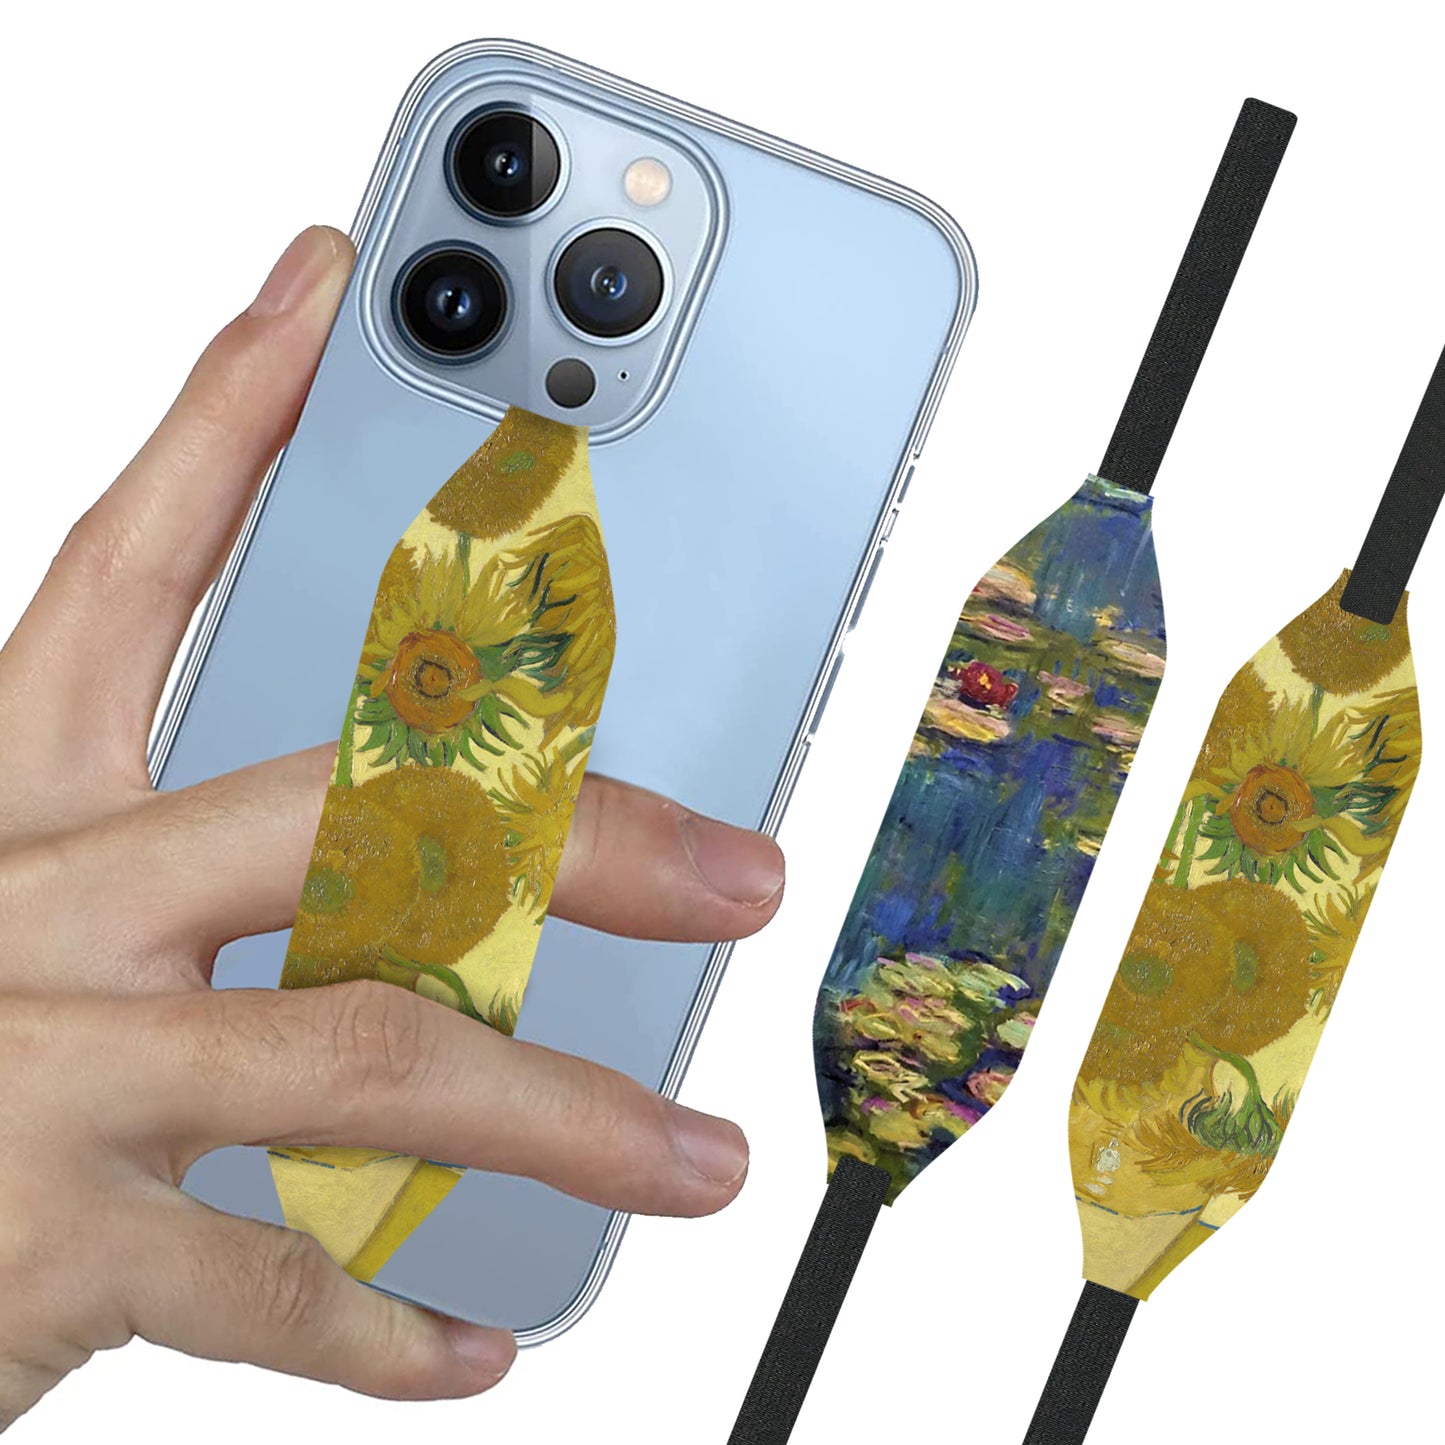 Switchbands Universal Stretchable Phone Hand Straps And Finger Loop For Phone Cases - Pink & Blue Flowers